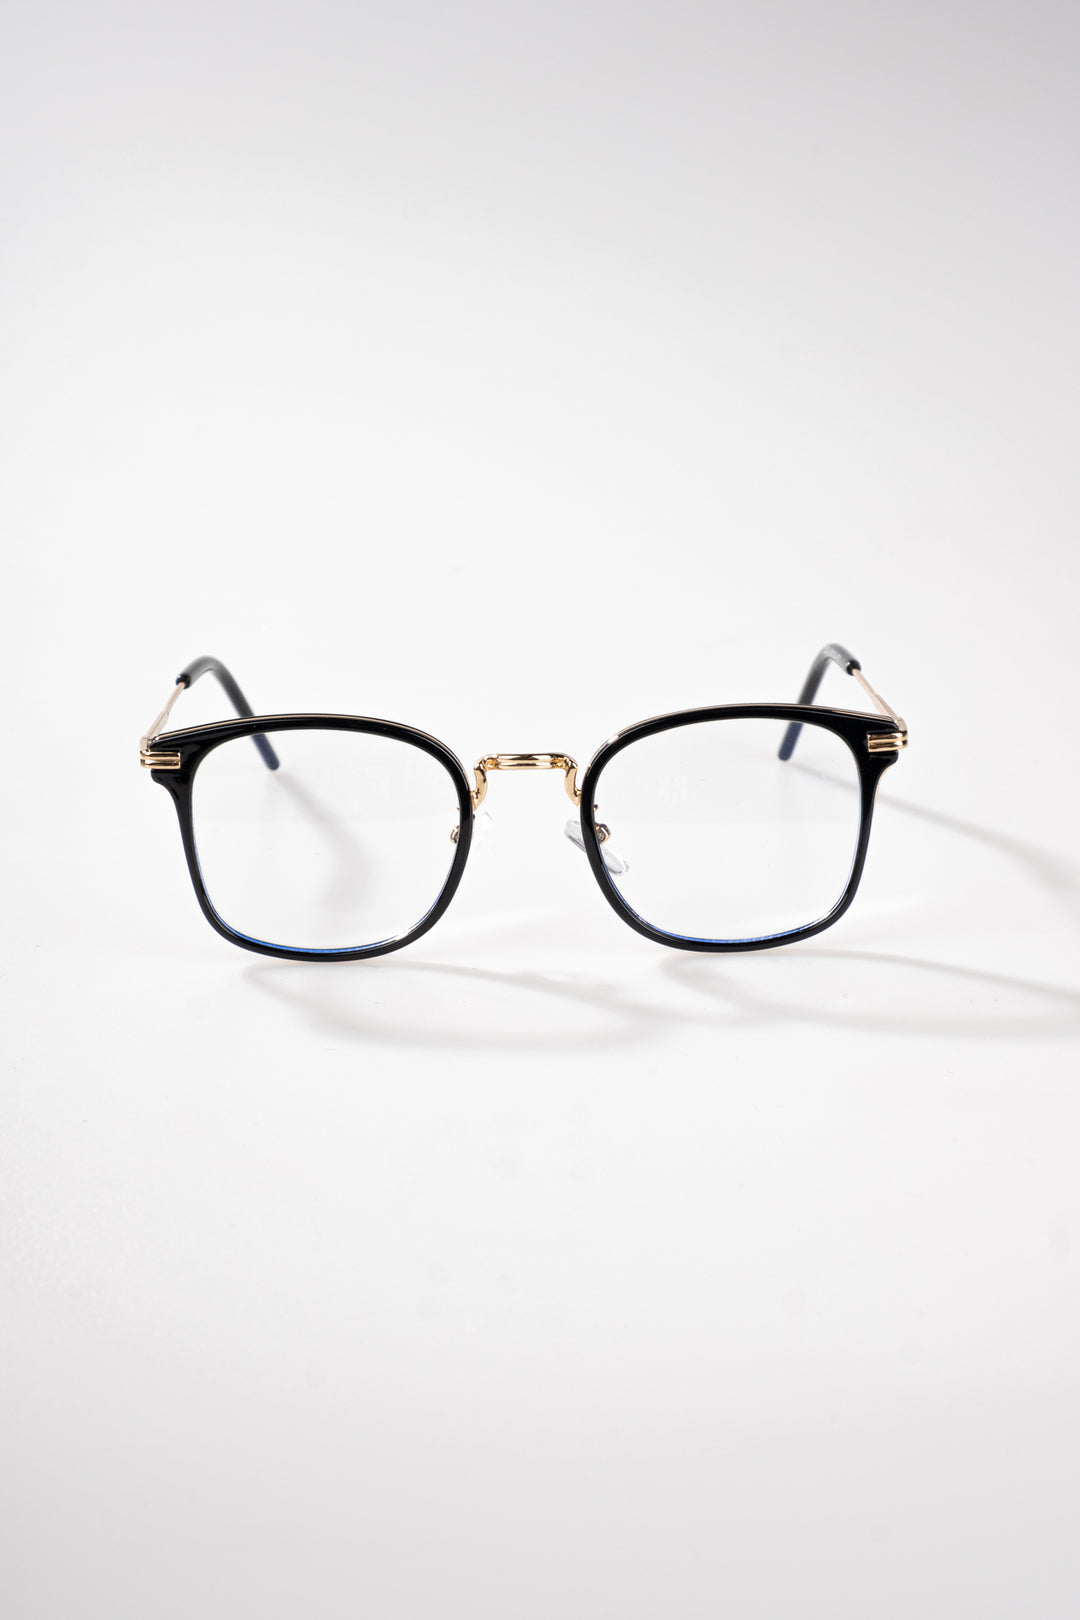 Lores Blue Light Protection Glasses